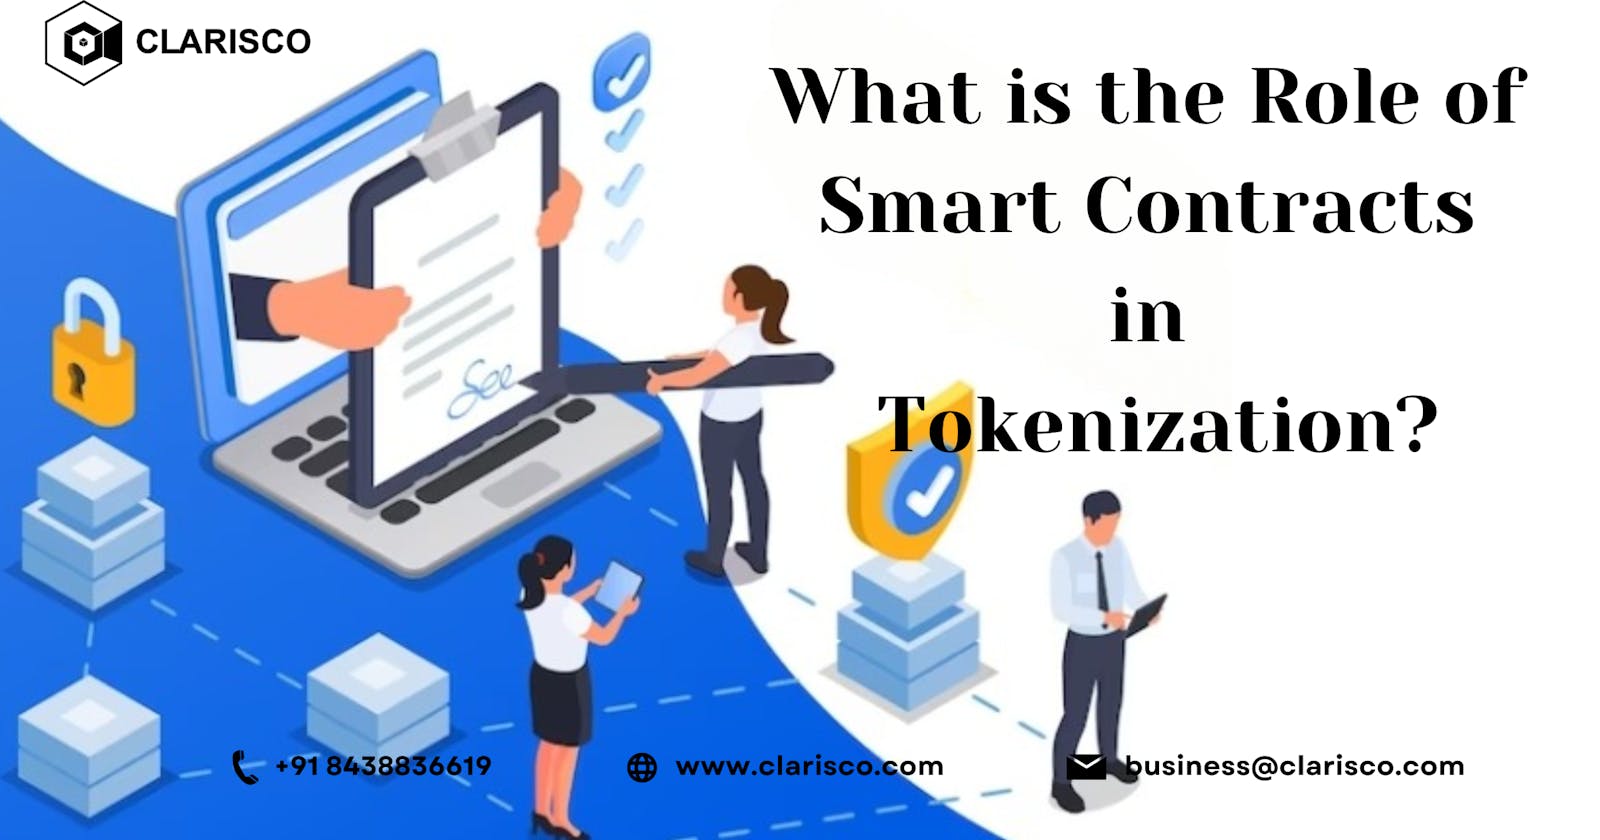 What is the Role of Smart Contracts in Tokenization?